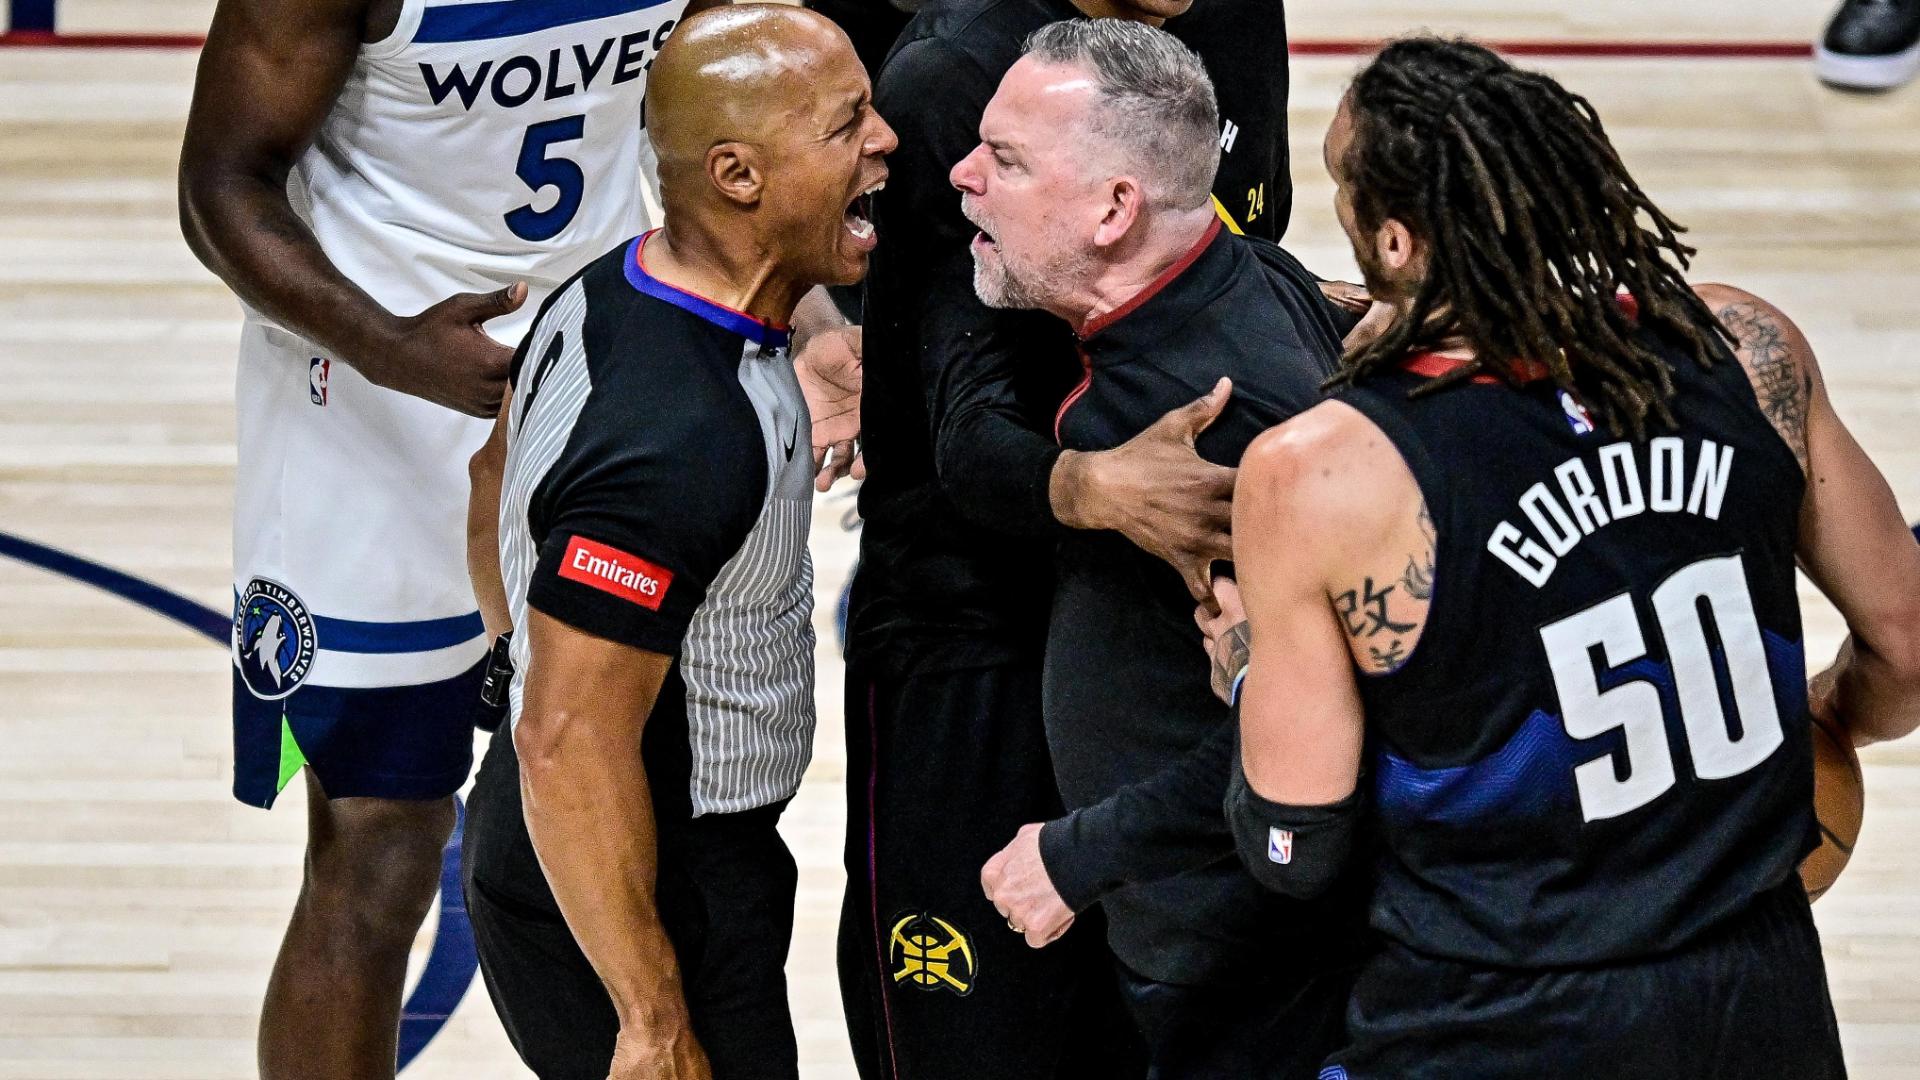 Michael Malone gets in ref's face after being infuriated by no-call